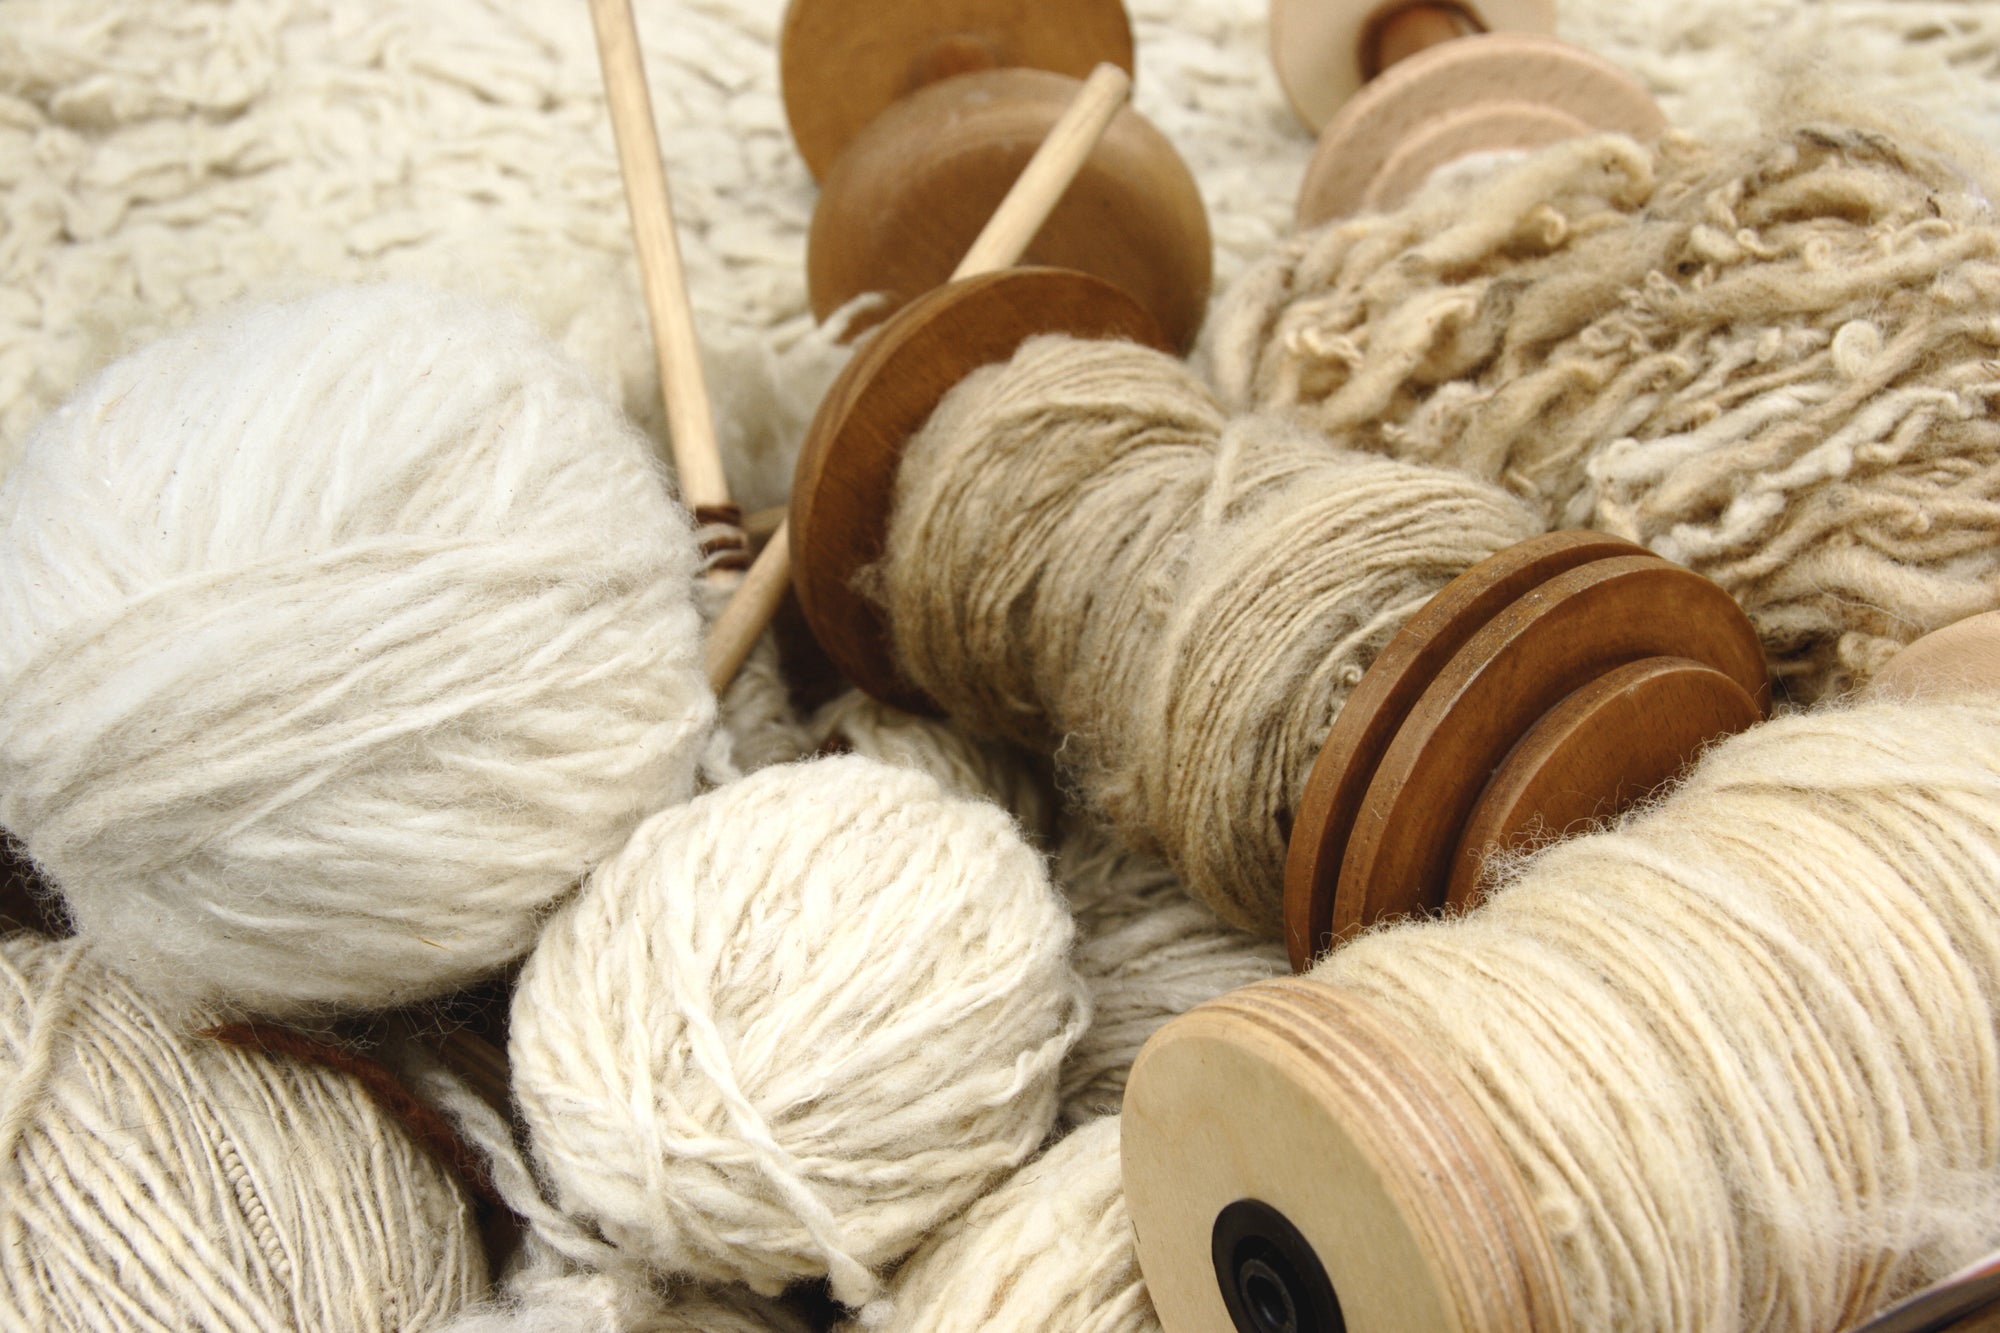 The Healing Powers of Natural Fibres